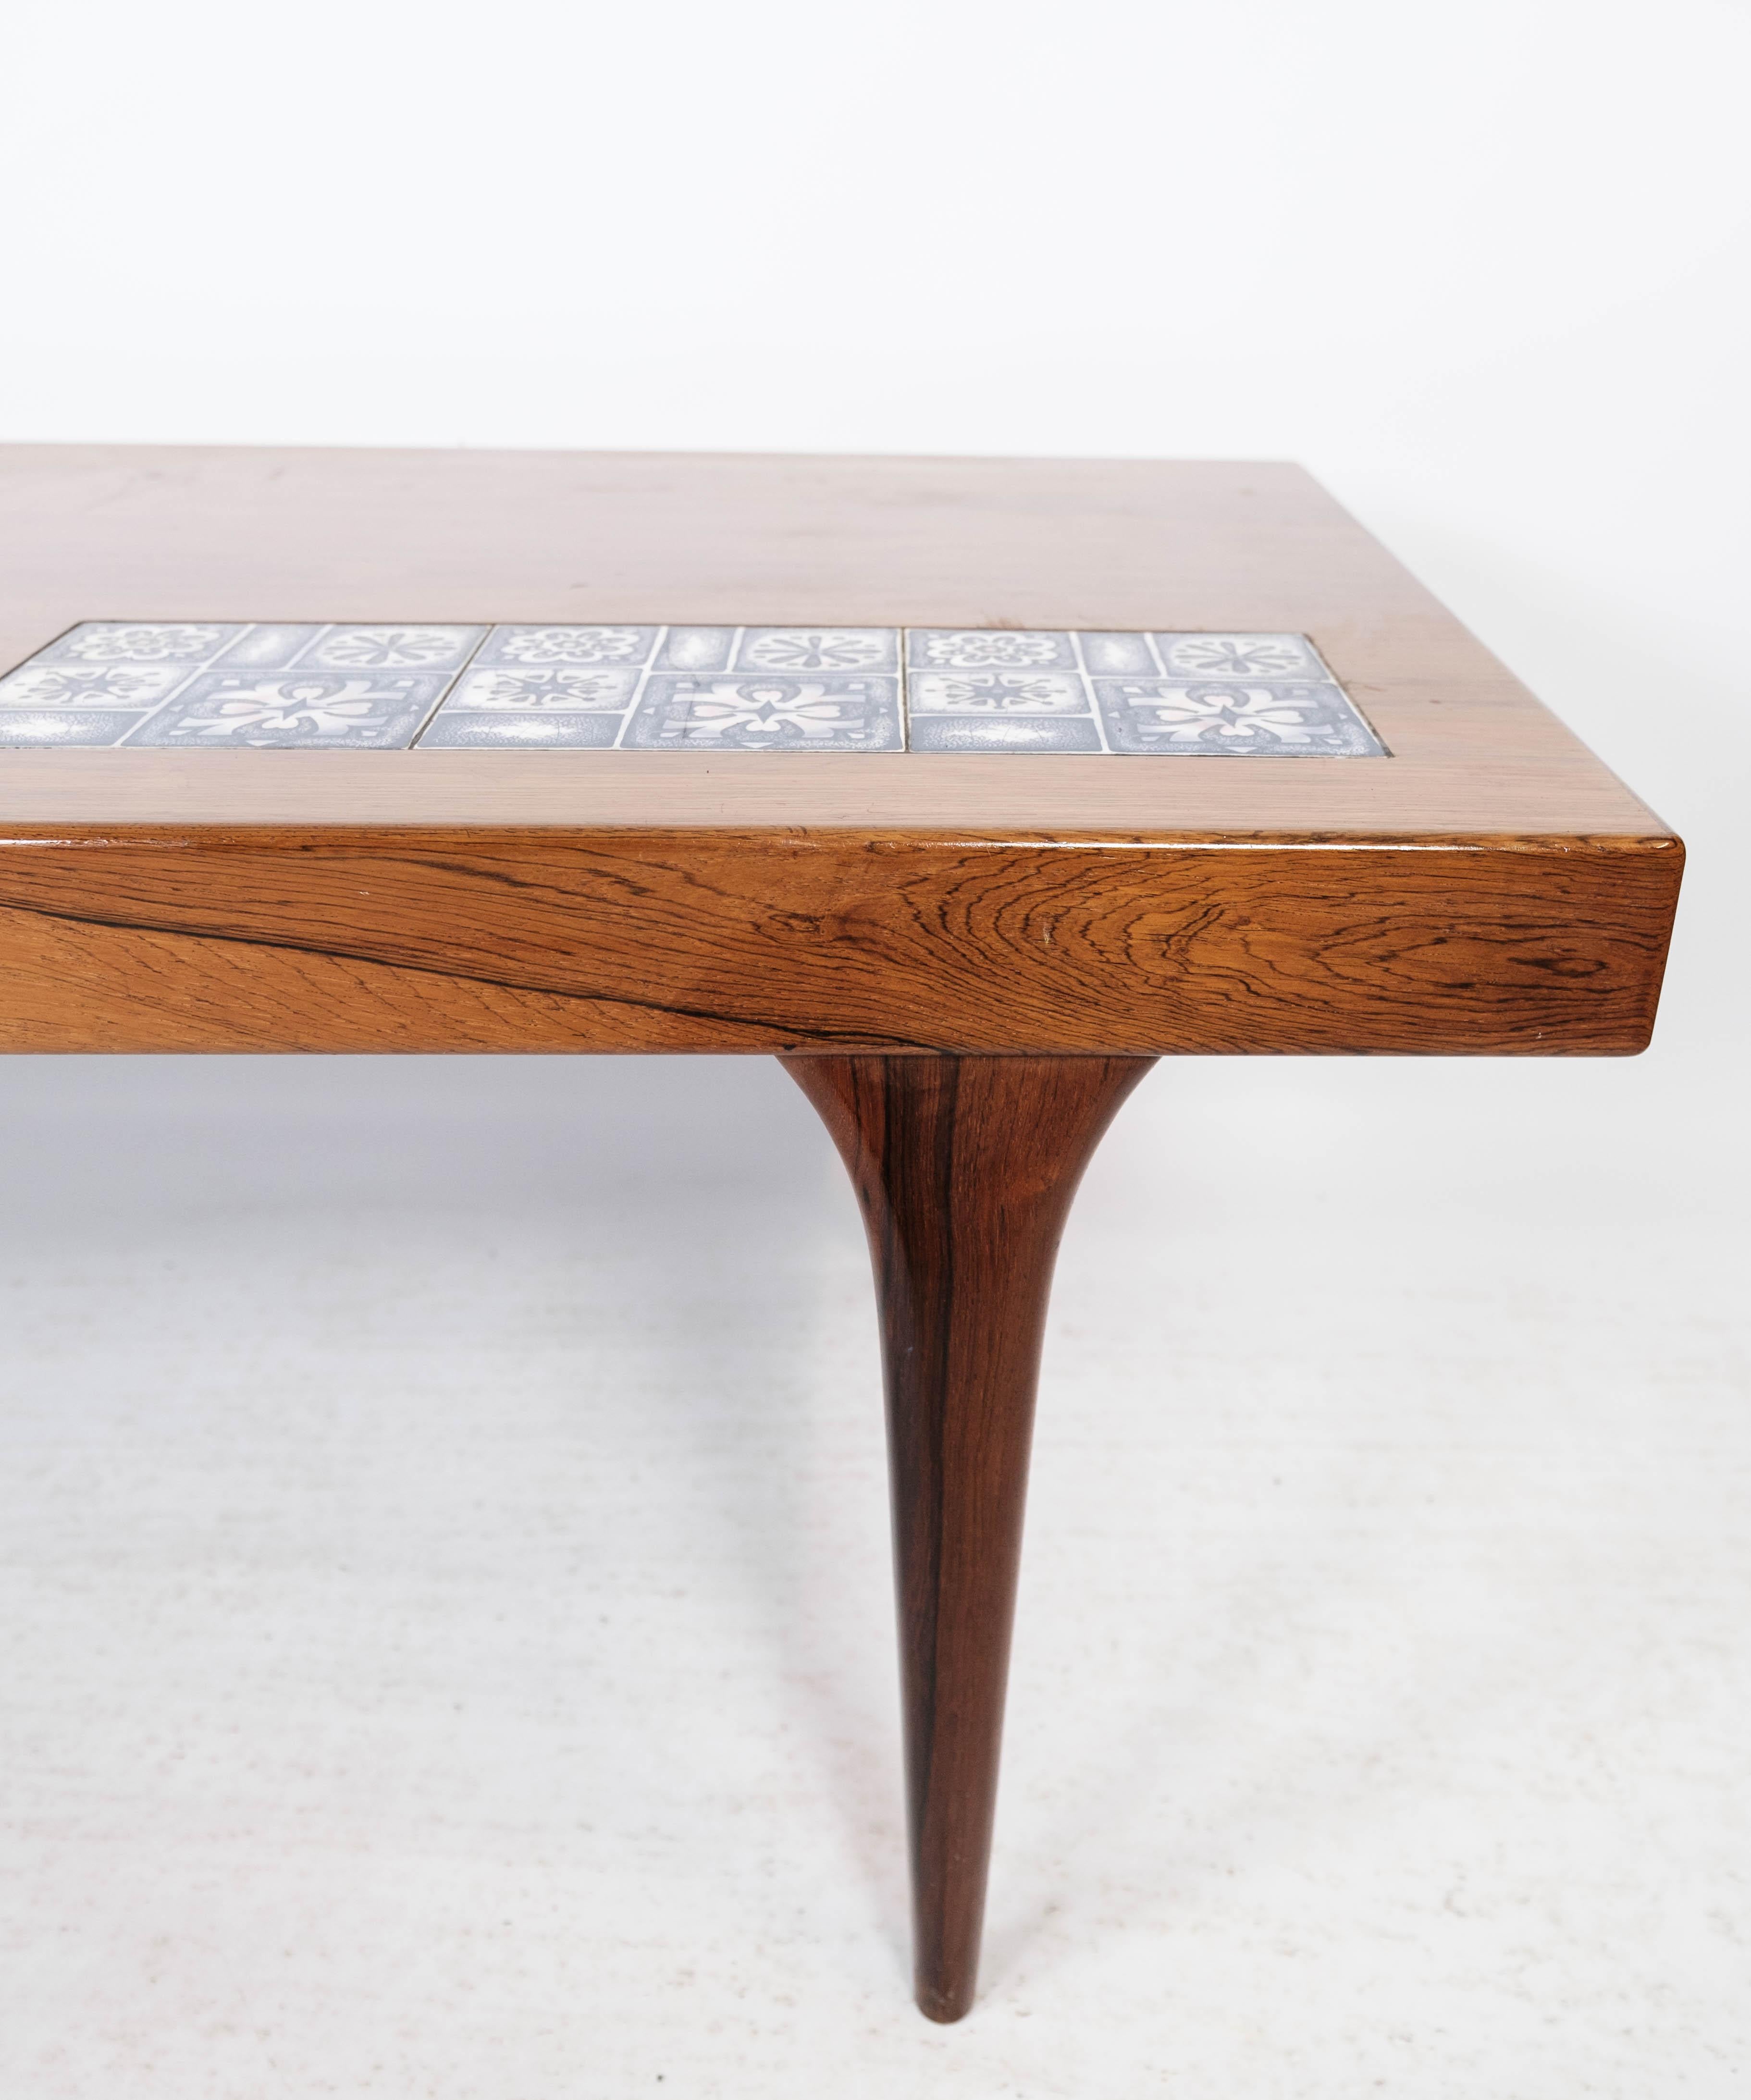 Mid-20th Century Coffee Table in Rosewood with Blue Tiles Designed by Johannes Andersen, 1960s